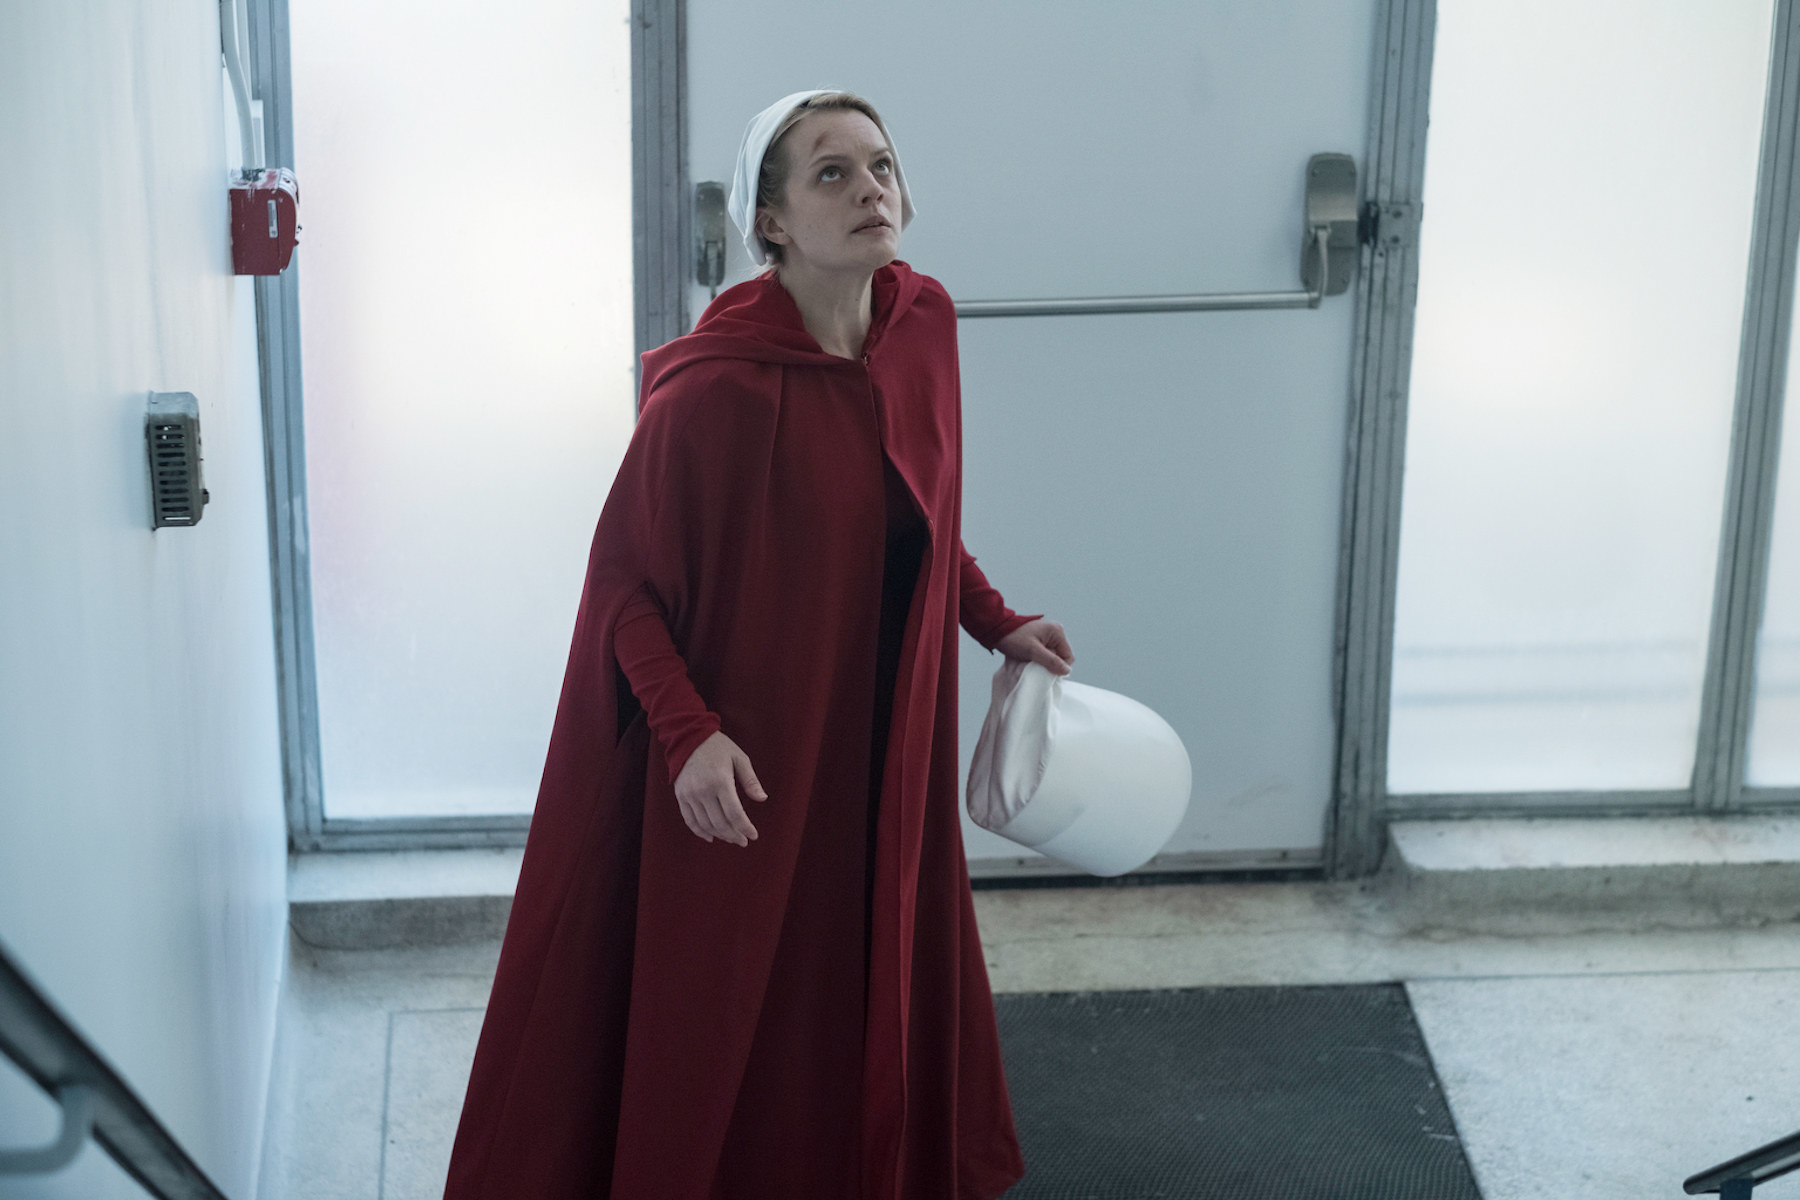 June trying to escape in her handmaid outfit